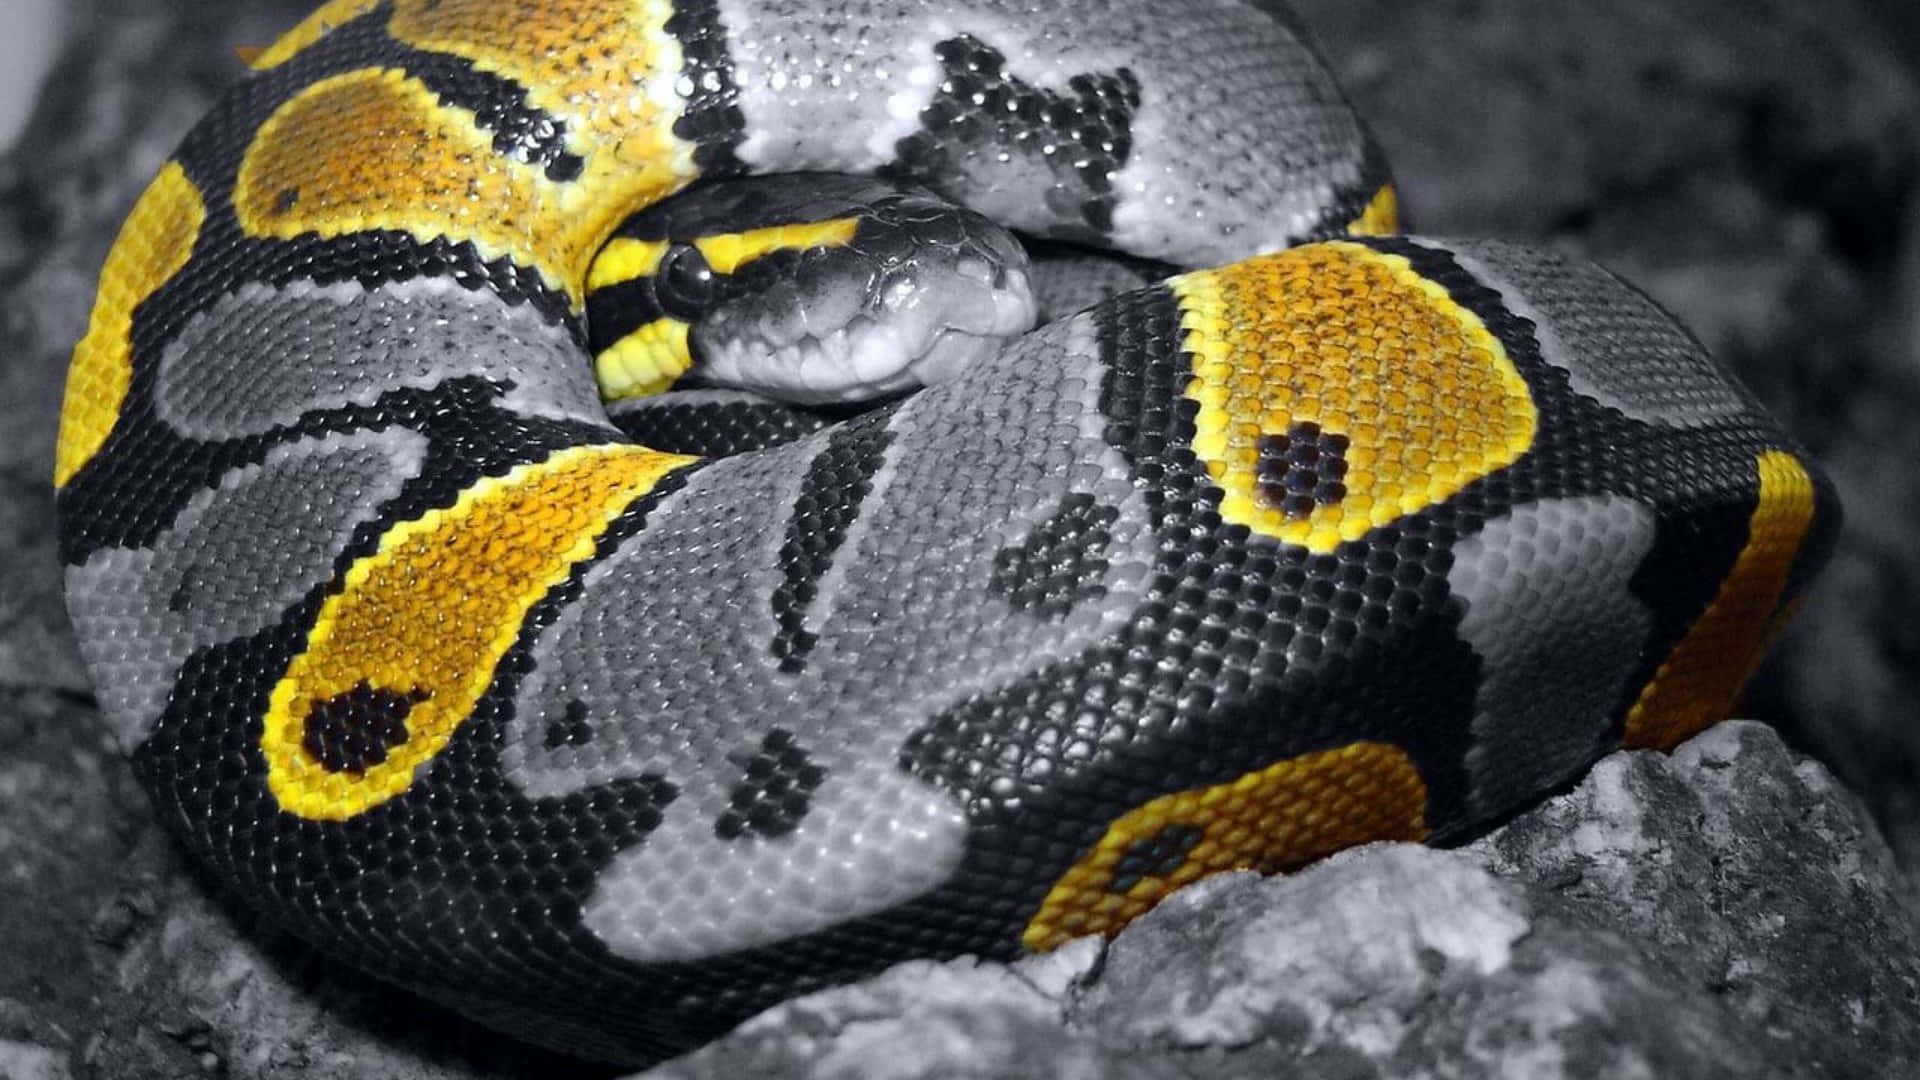 a snake is curled up on a rock Wallpaper